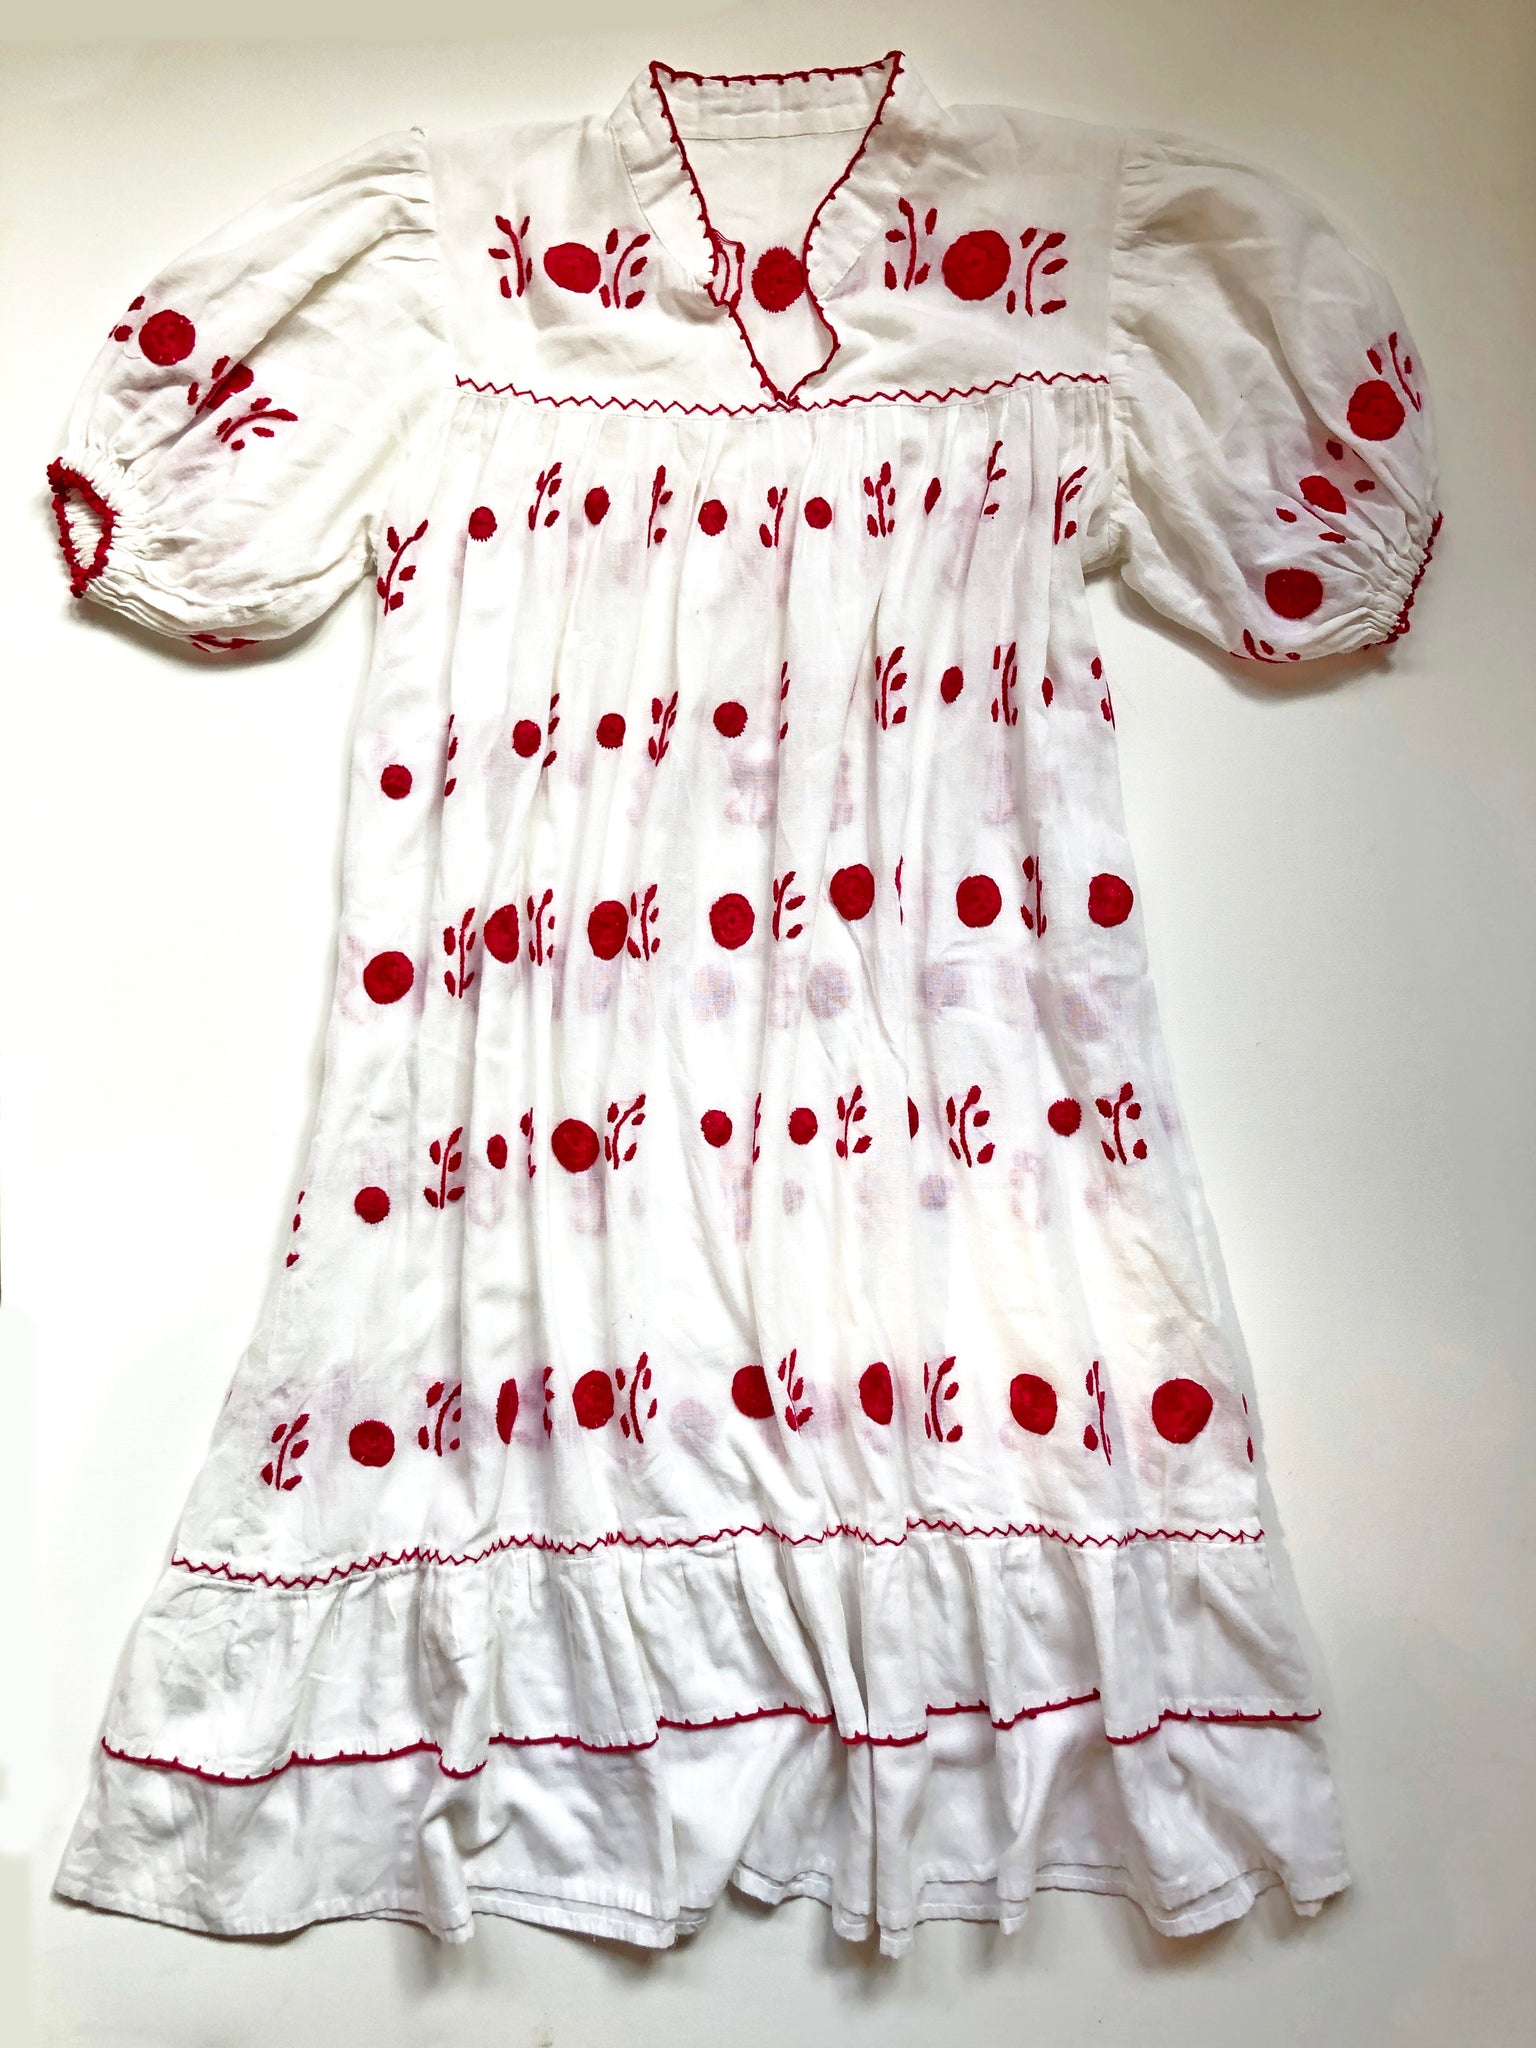 VINTAGE: Hand-Embroidered Cotton Dress